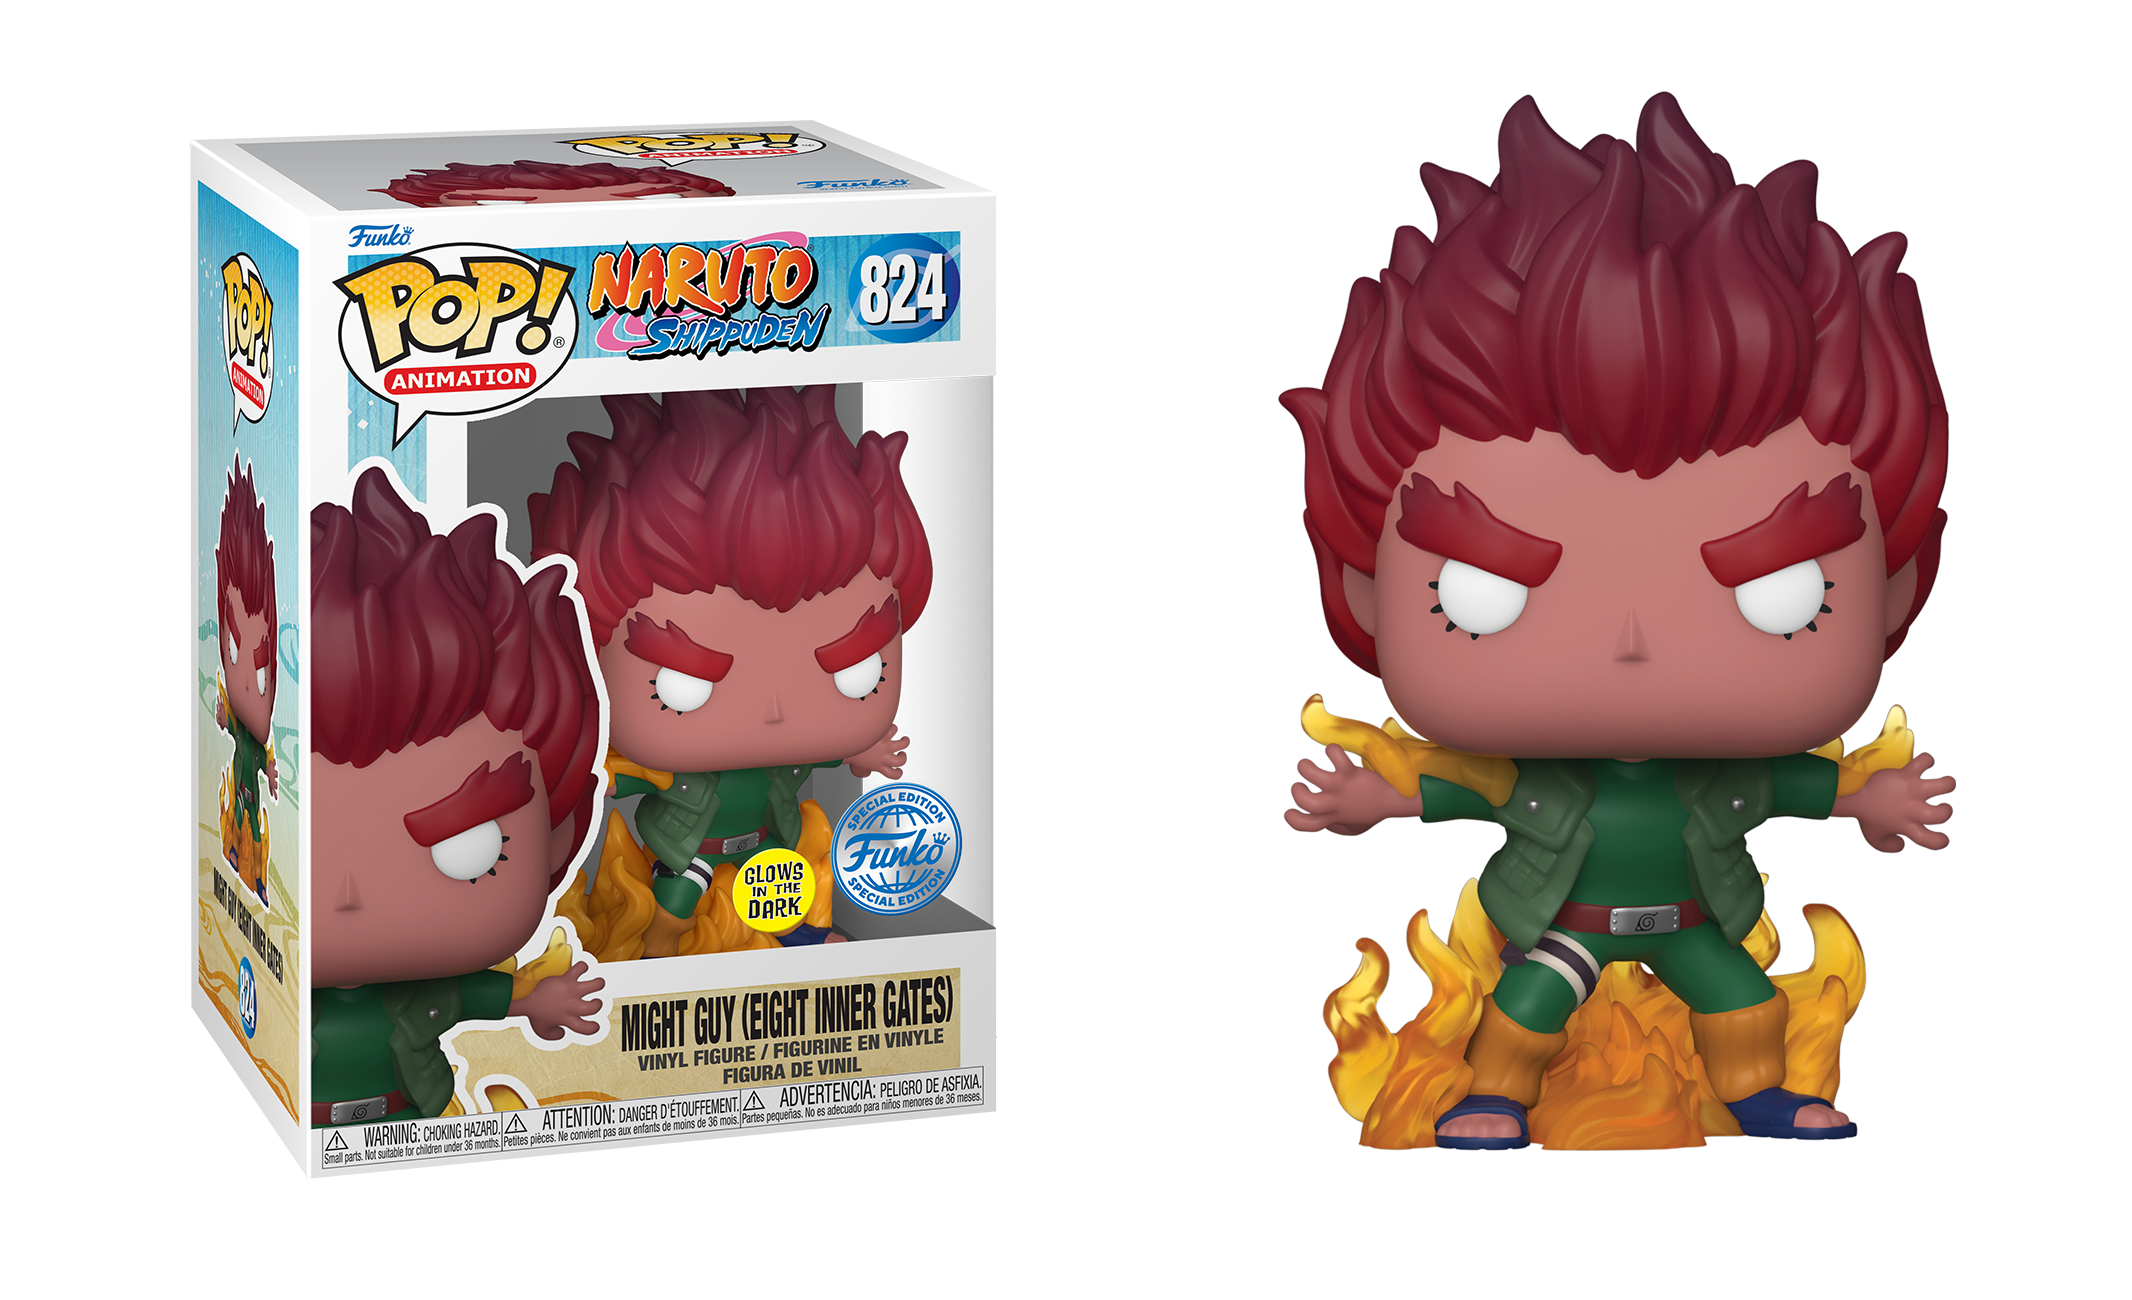 Pop! Animation - Naruto Shippuden - Might Guy [Eight Inner Gates][Glow][Special Edition]